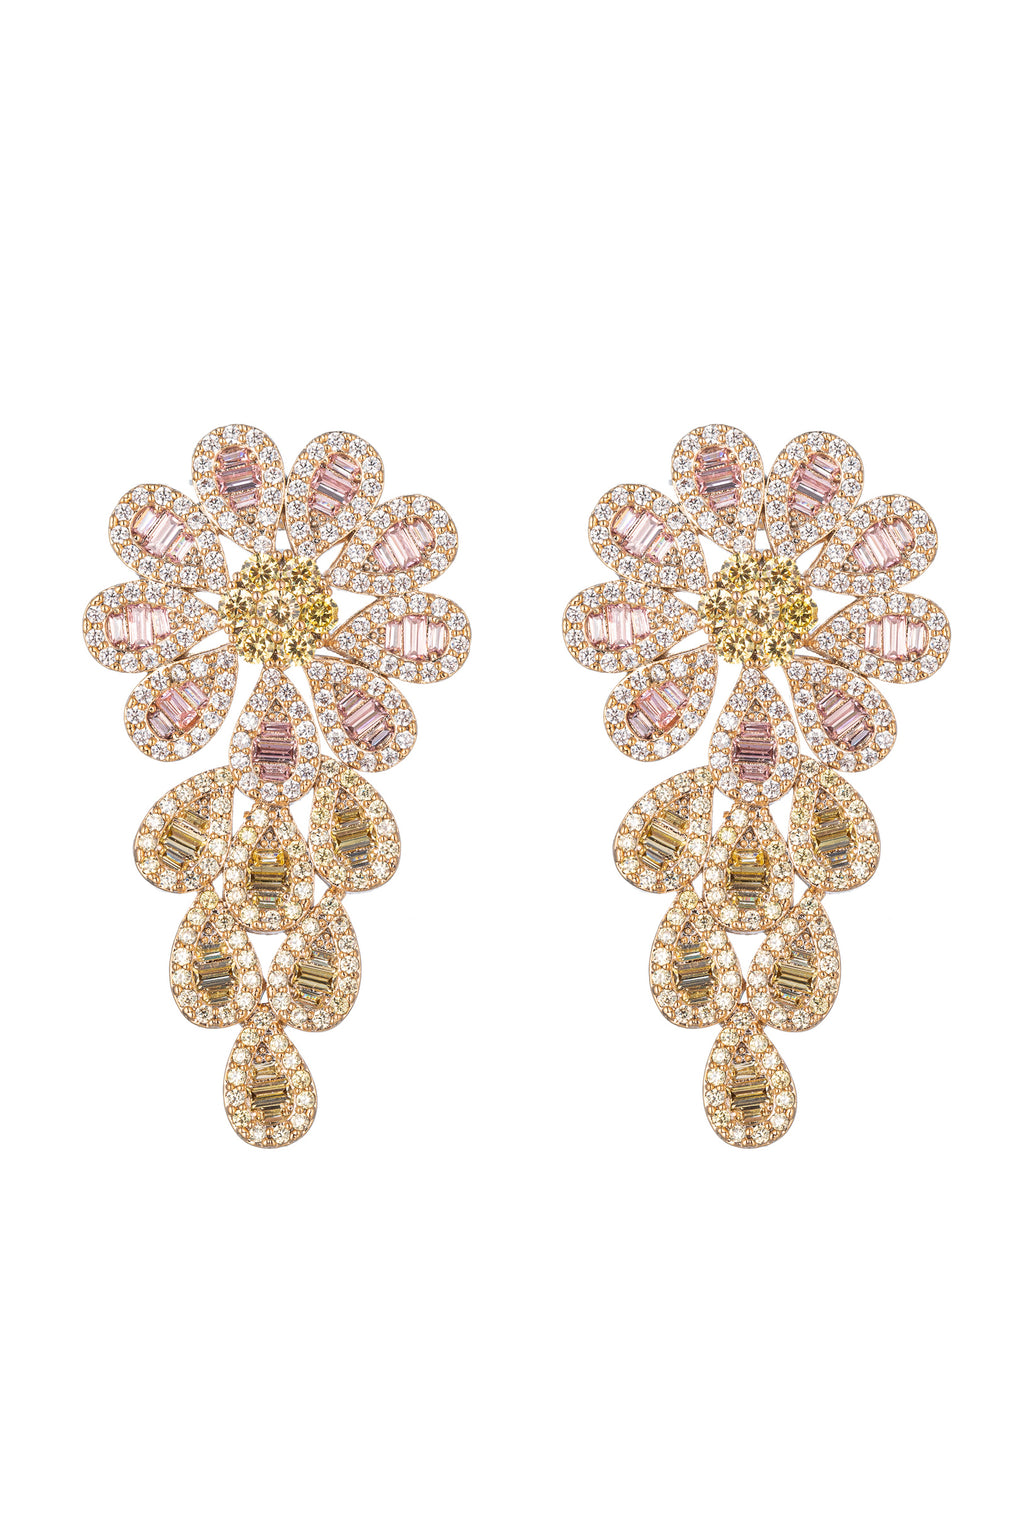 Gold tone brass flower drop earrings studded with CZ crystals.